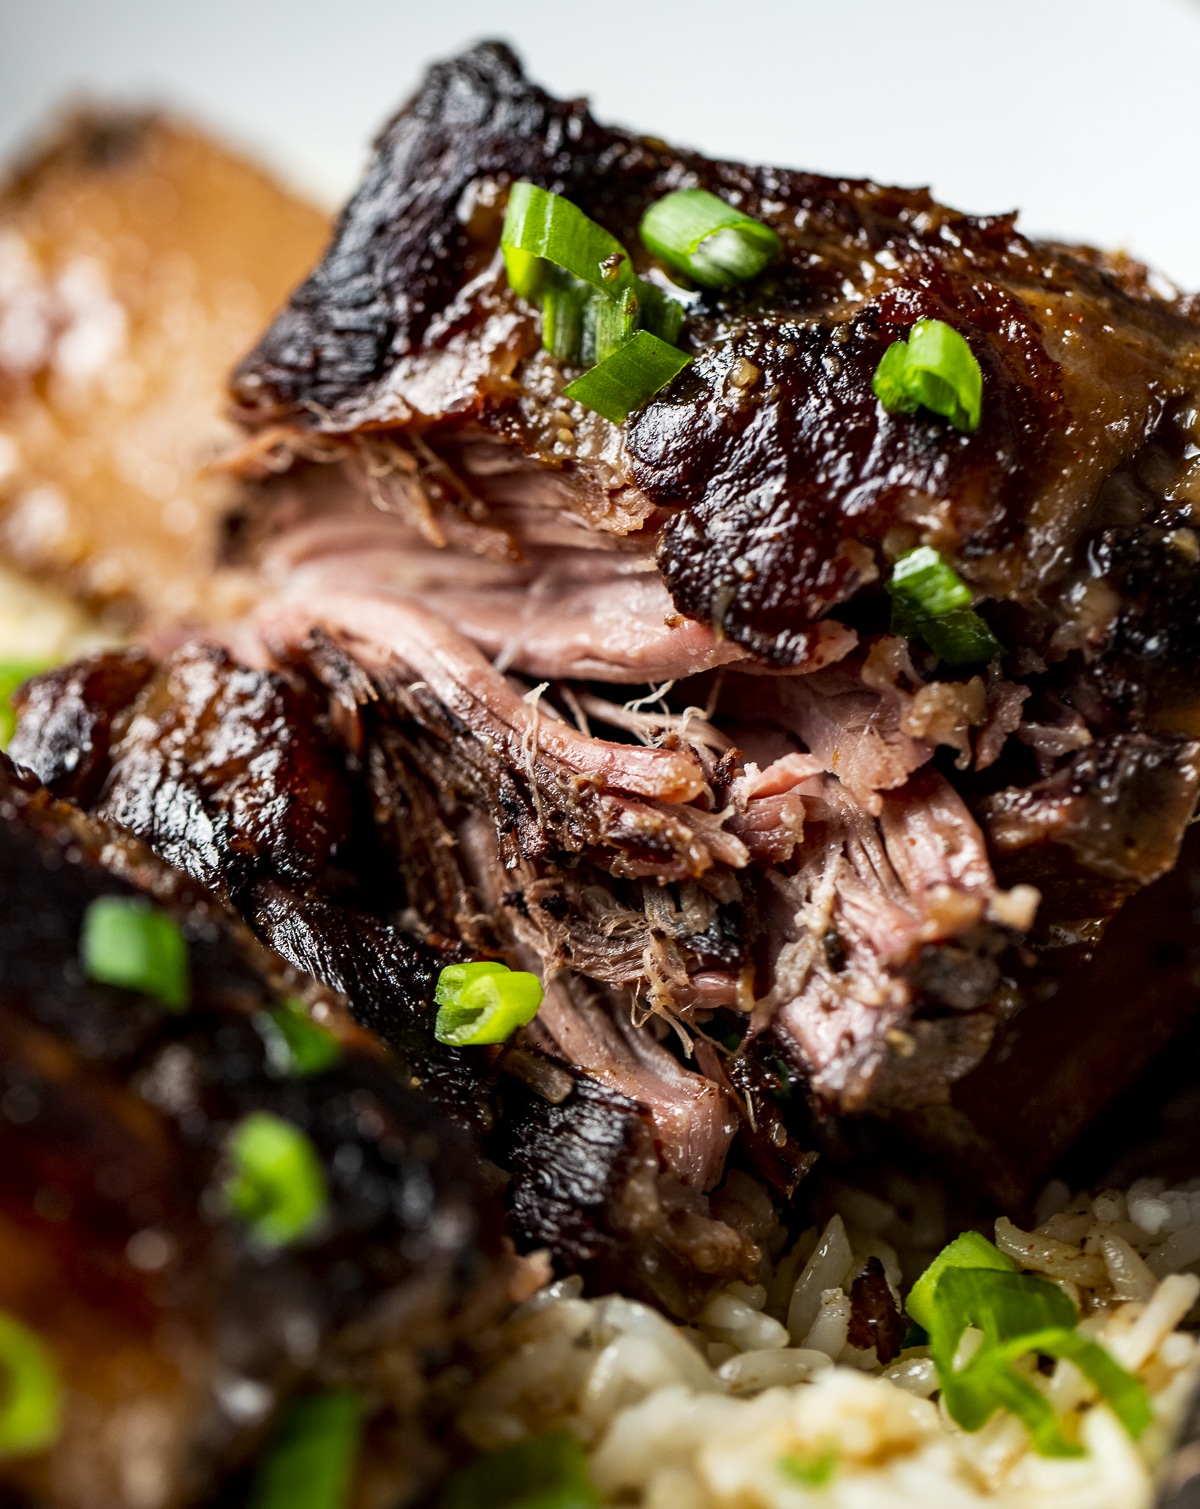 Close up view of the meaty and juicy texture of short ribs.